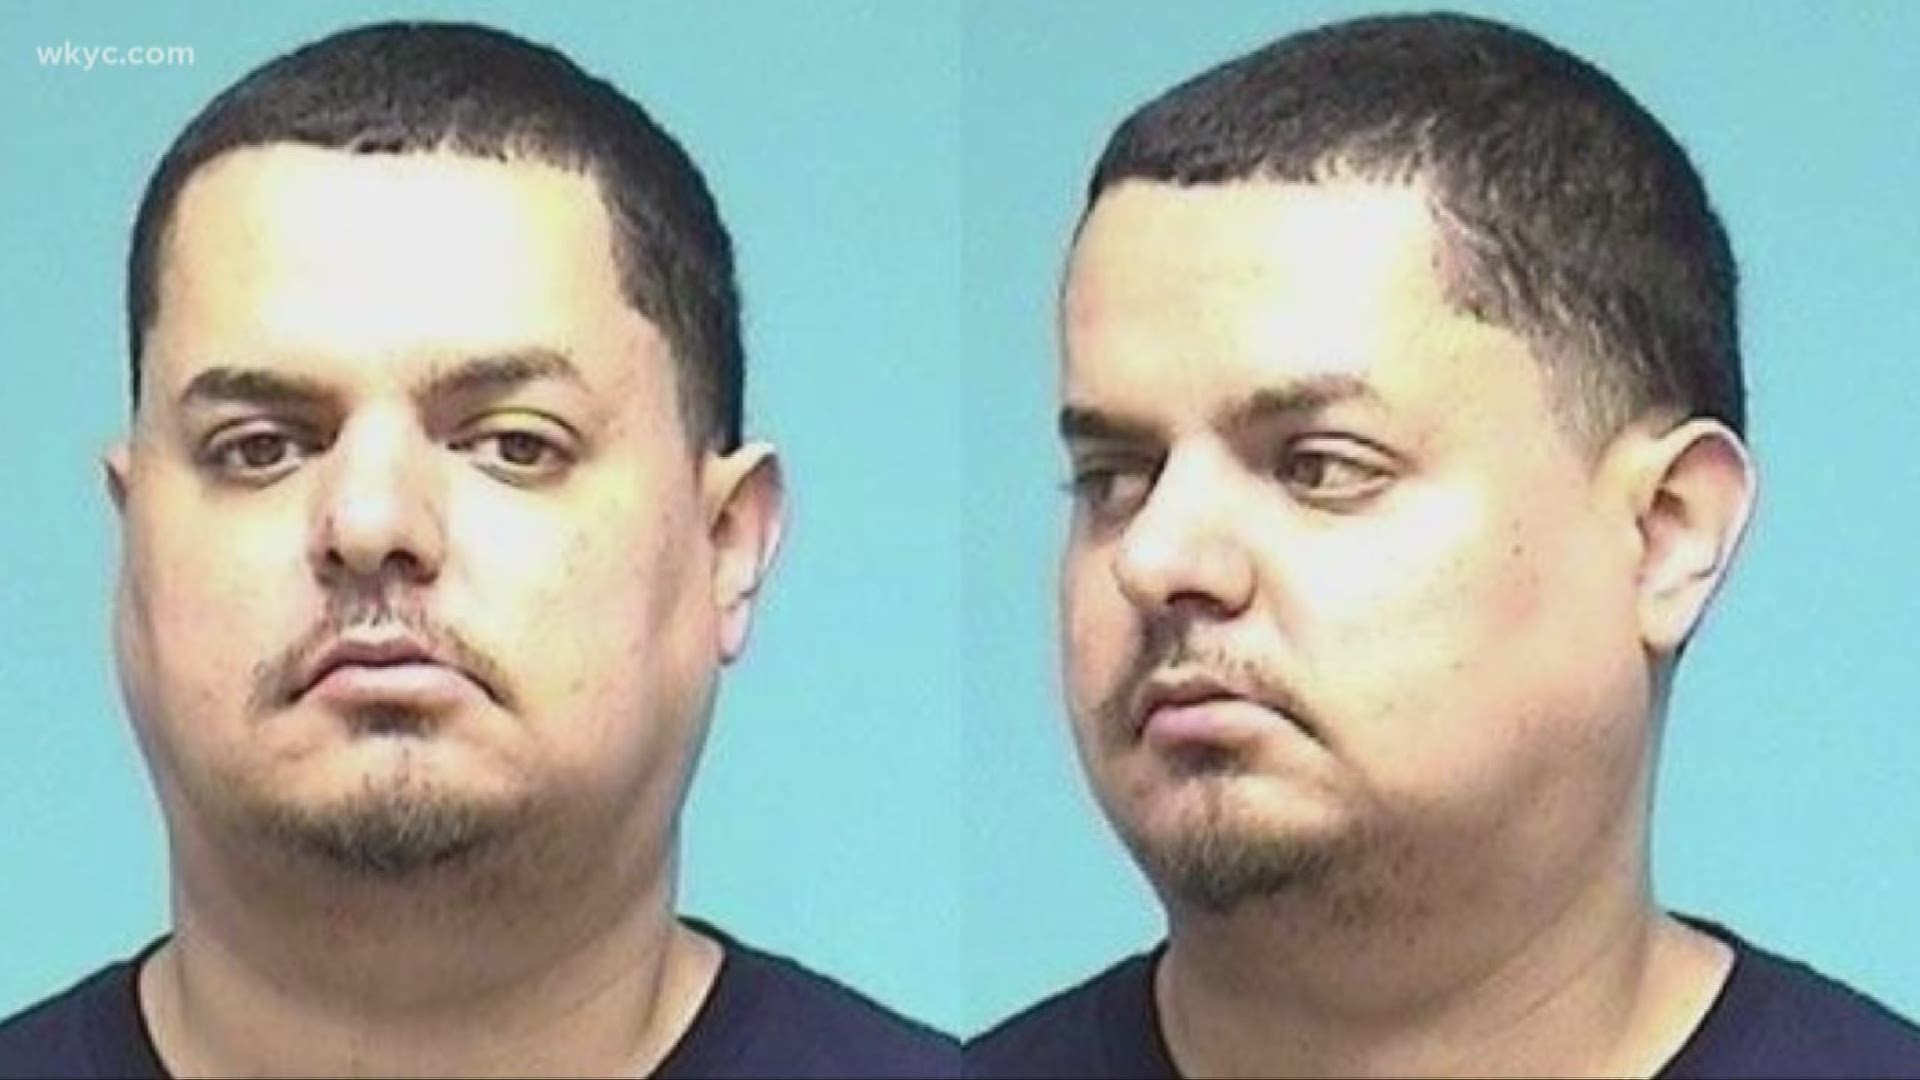 Jan. 14, 2019: Lorain city councilman Angel Arroyo was booked into the county jail this morning on charges of domestic violence and resisting arrest. According to a police report, Arroyo's wife called police around 1:24 a.m. from the couple's E. 30th Street home and told responding officers her intoxicated husband had assaulted her.